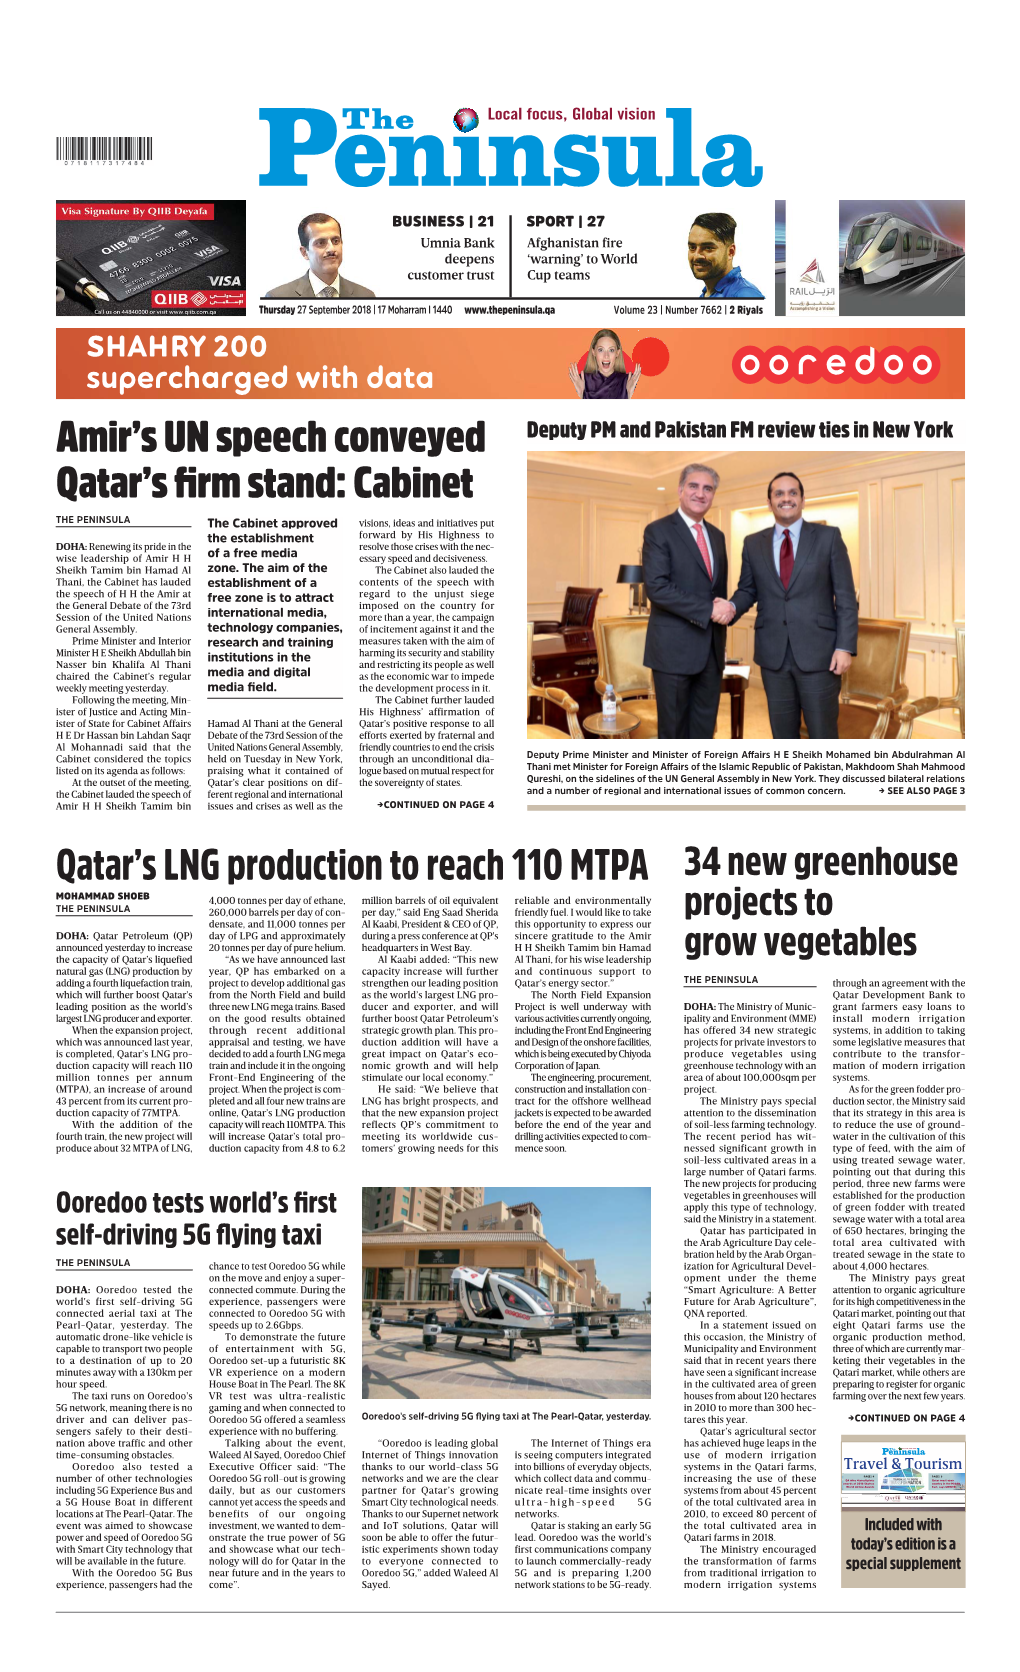 Cabinet Qatar's LNG Production to Reach 110 MTPA